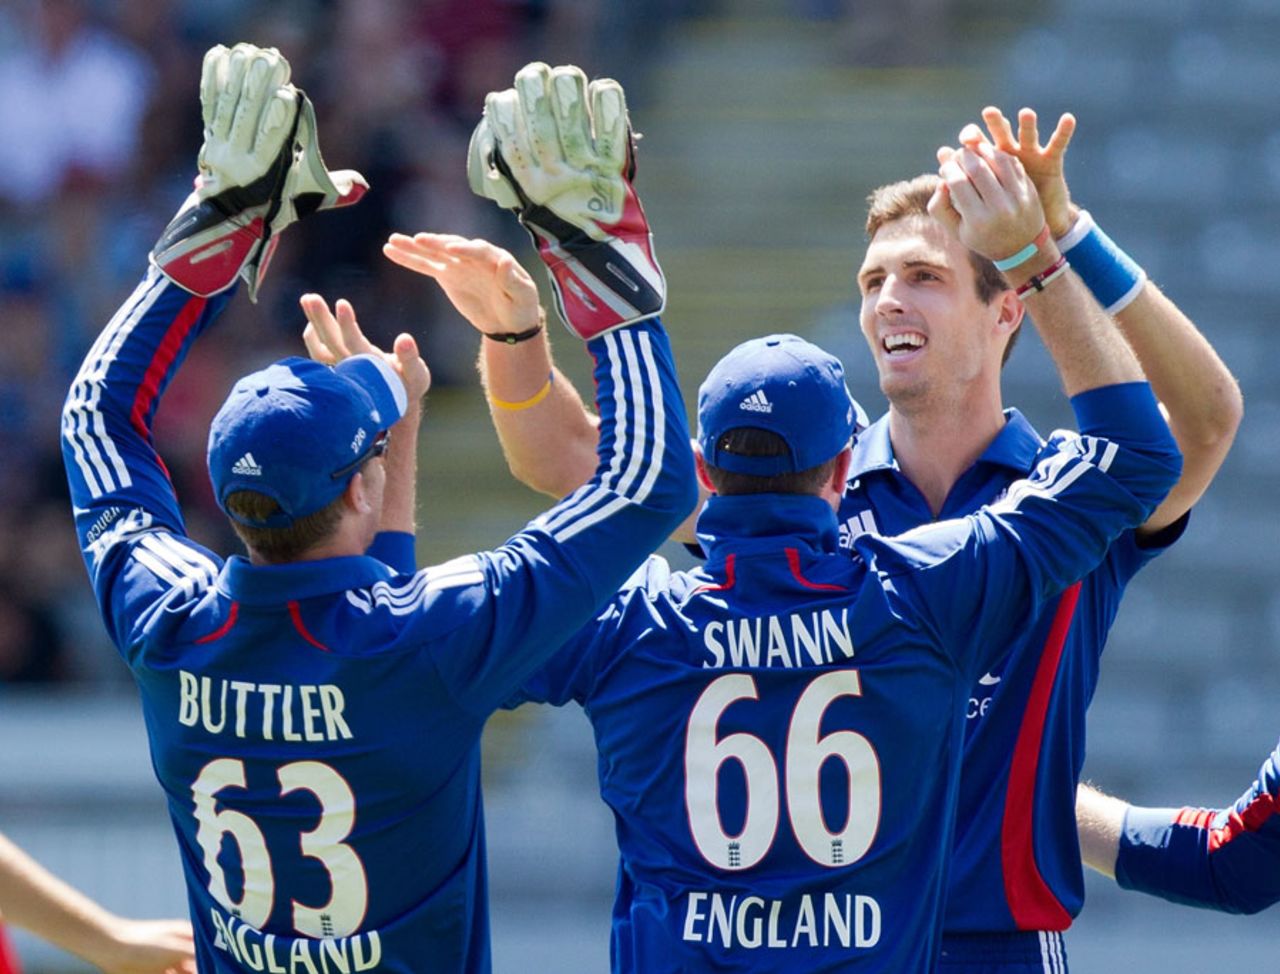 Steven Finn claimed the first wicket of the day, New Zealand v England, 3rd ODI, Auckland, February 23, 2013